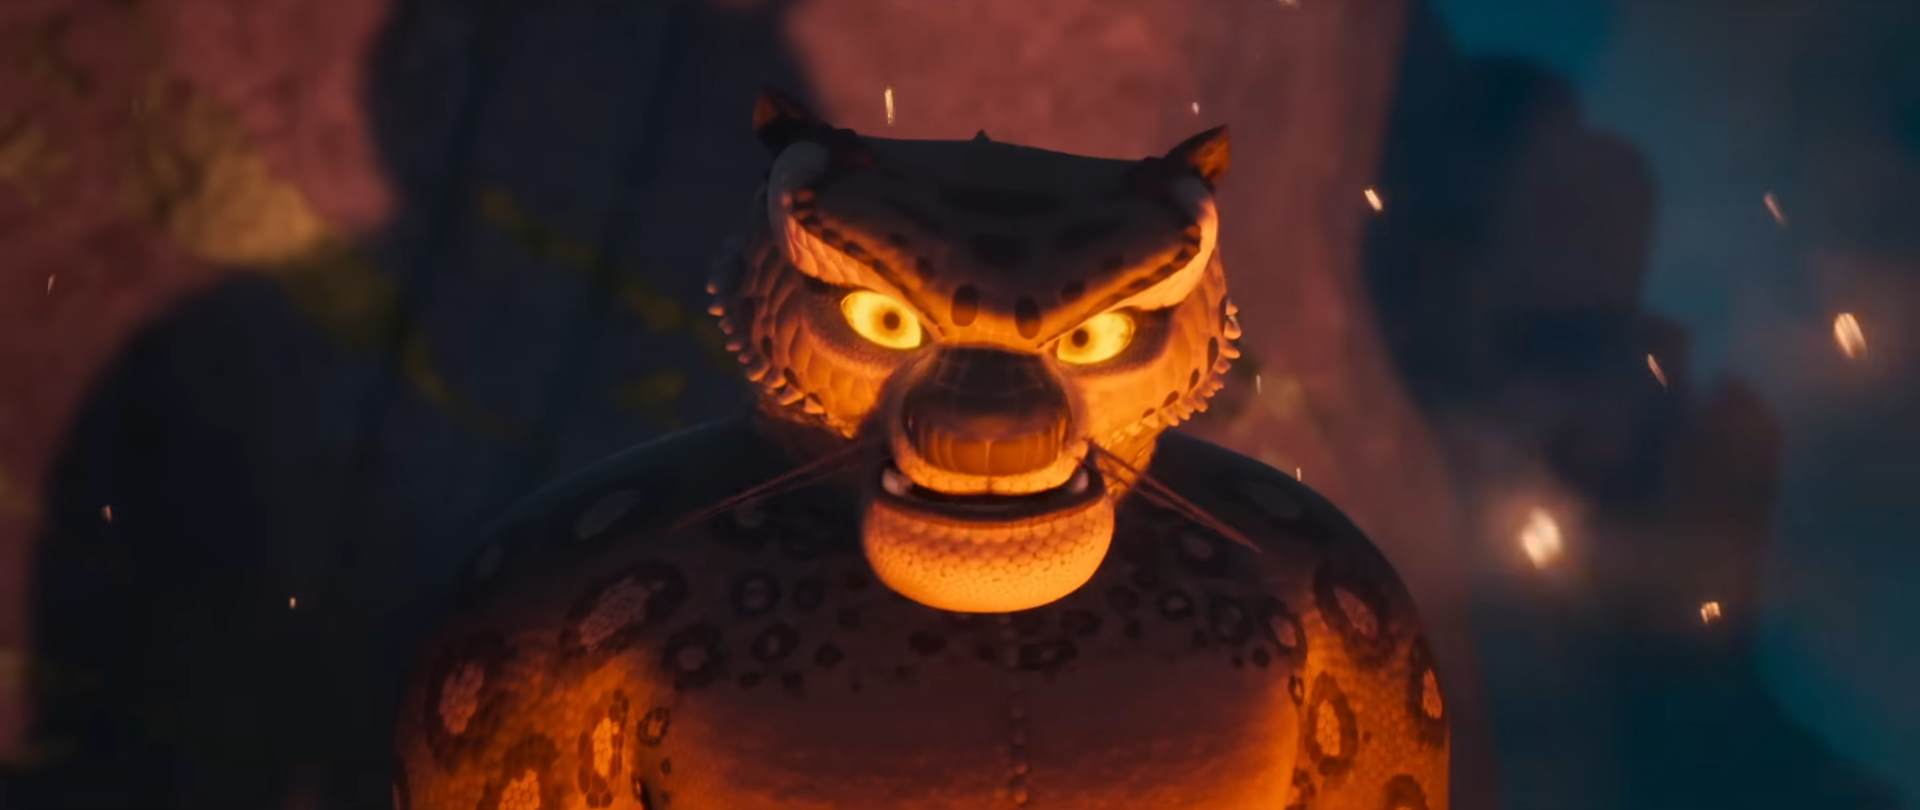 KUNG FU PANDA 4 Official Trailer Showcases What's Next for the Dragon ...